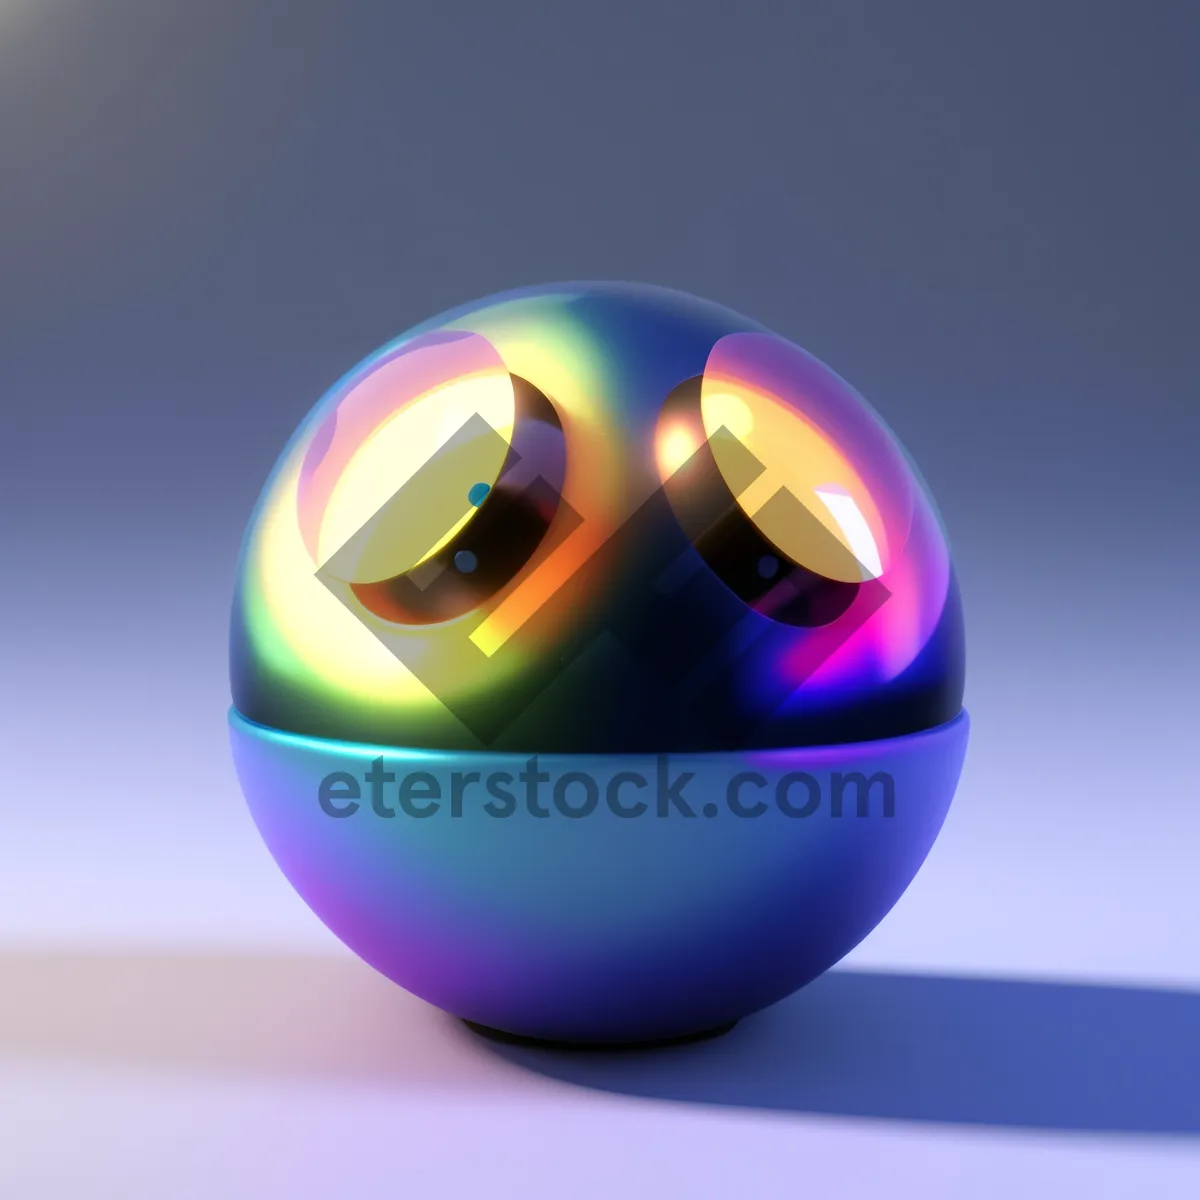 Picture of Glossy Glass Ball Icon Set: Bright and Shiny Web Buttons